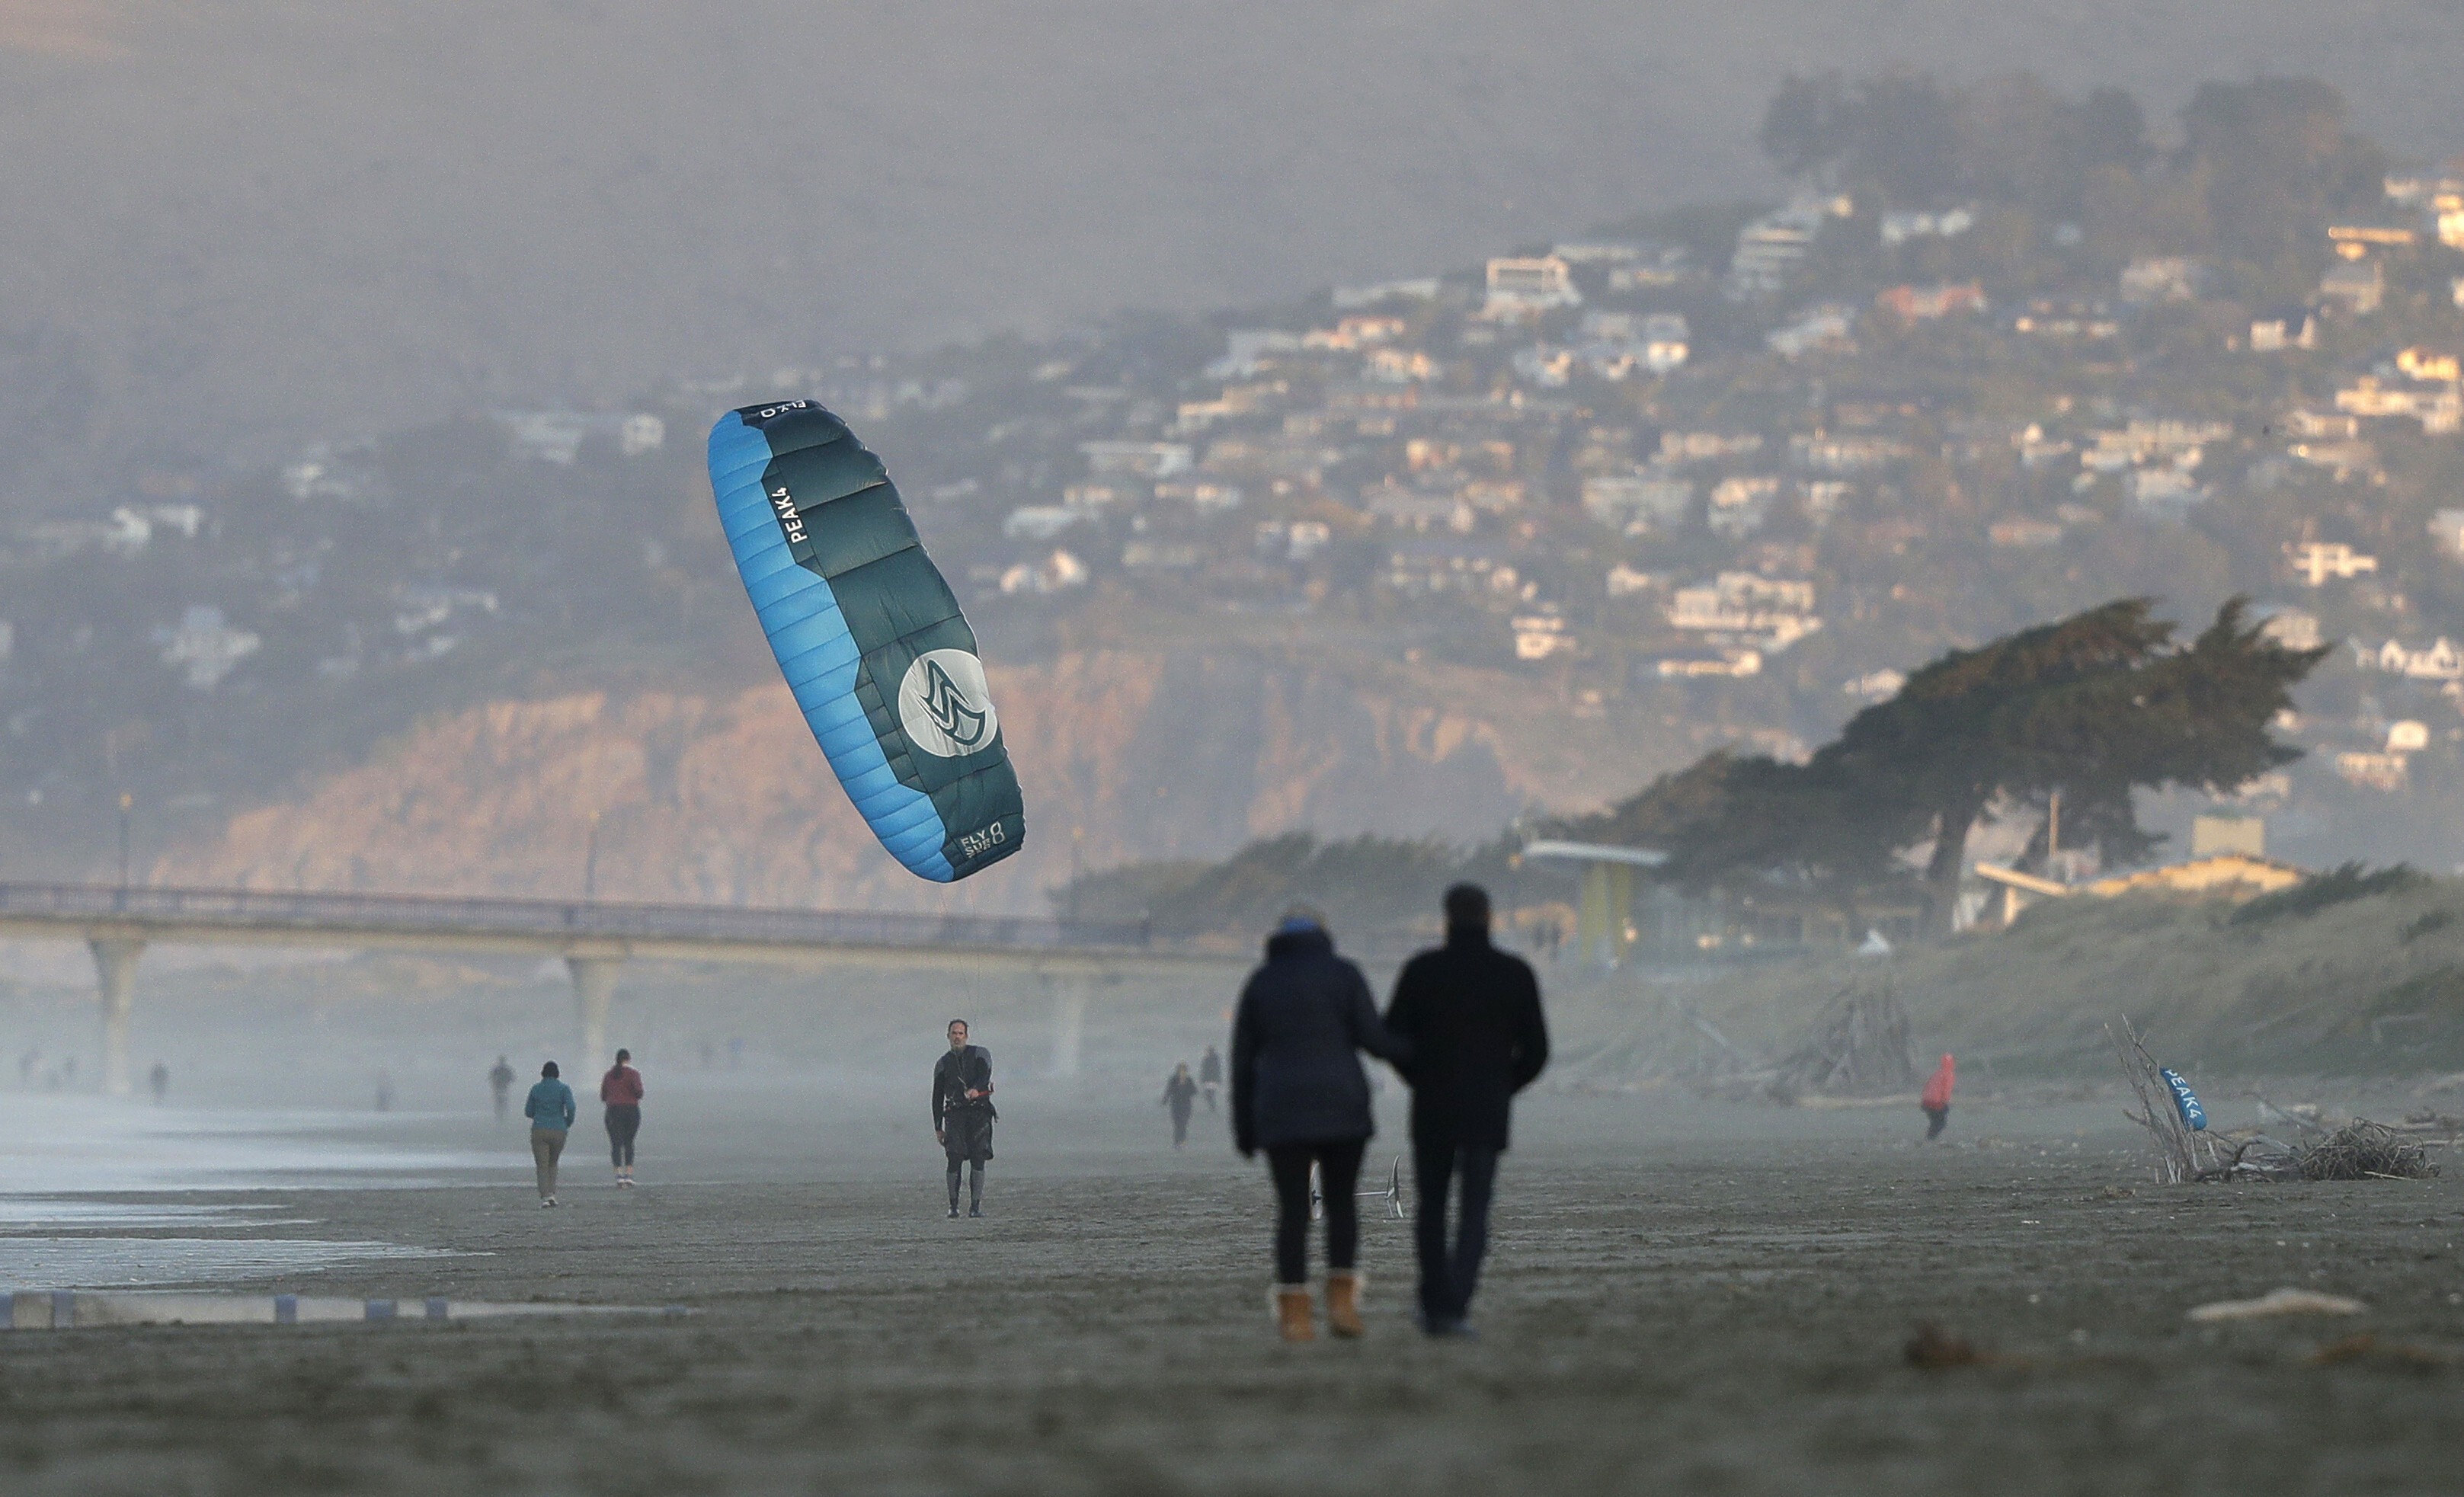 A windsurfer reels in his kite at New Brighton Beach in Christchurch, New Zealand, a day after Prime Minister Jacinda Ardern announced the removal of most coronavirus restrictions. Photo: AP